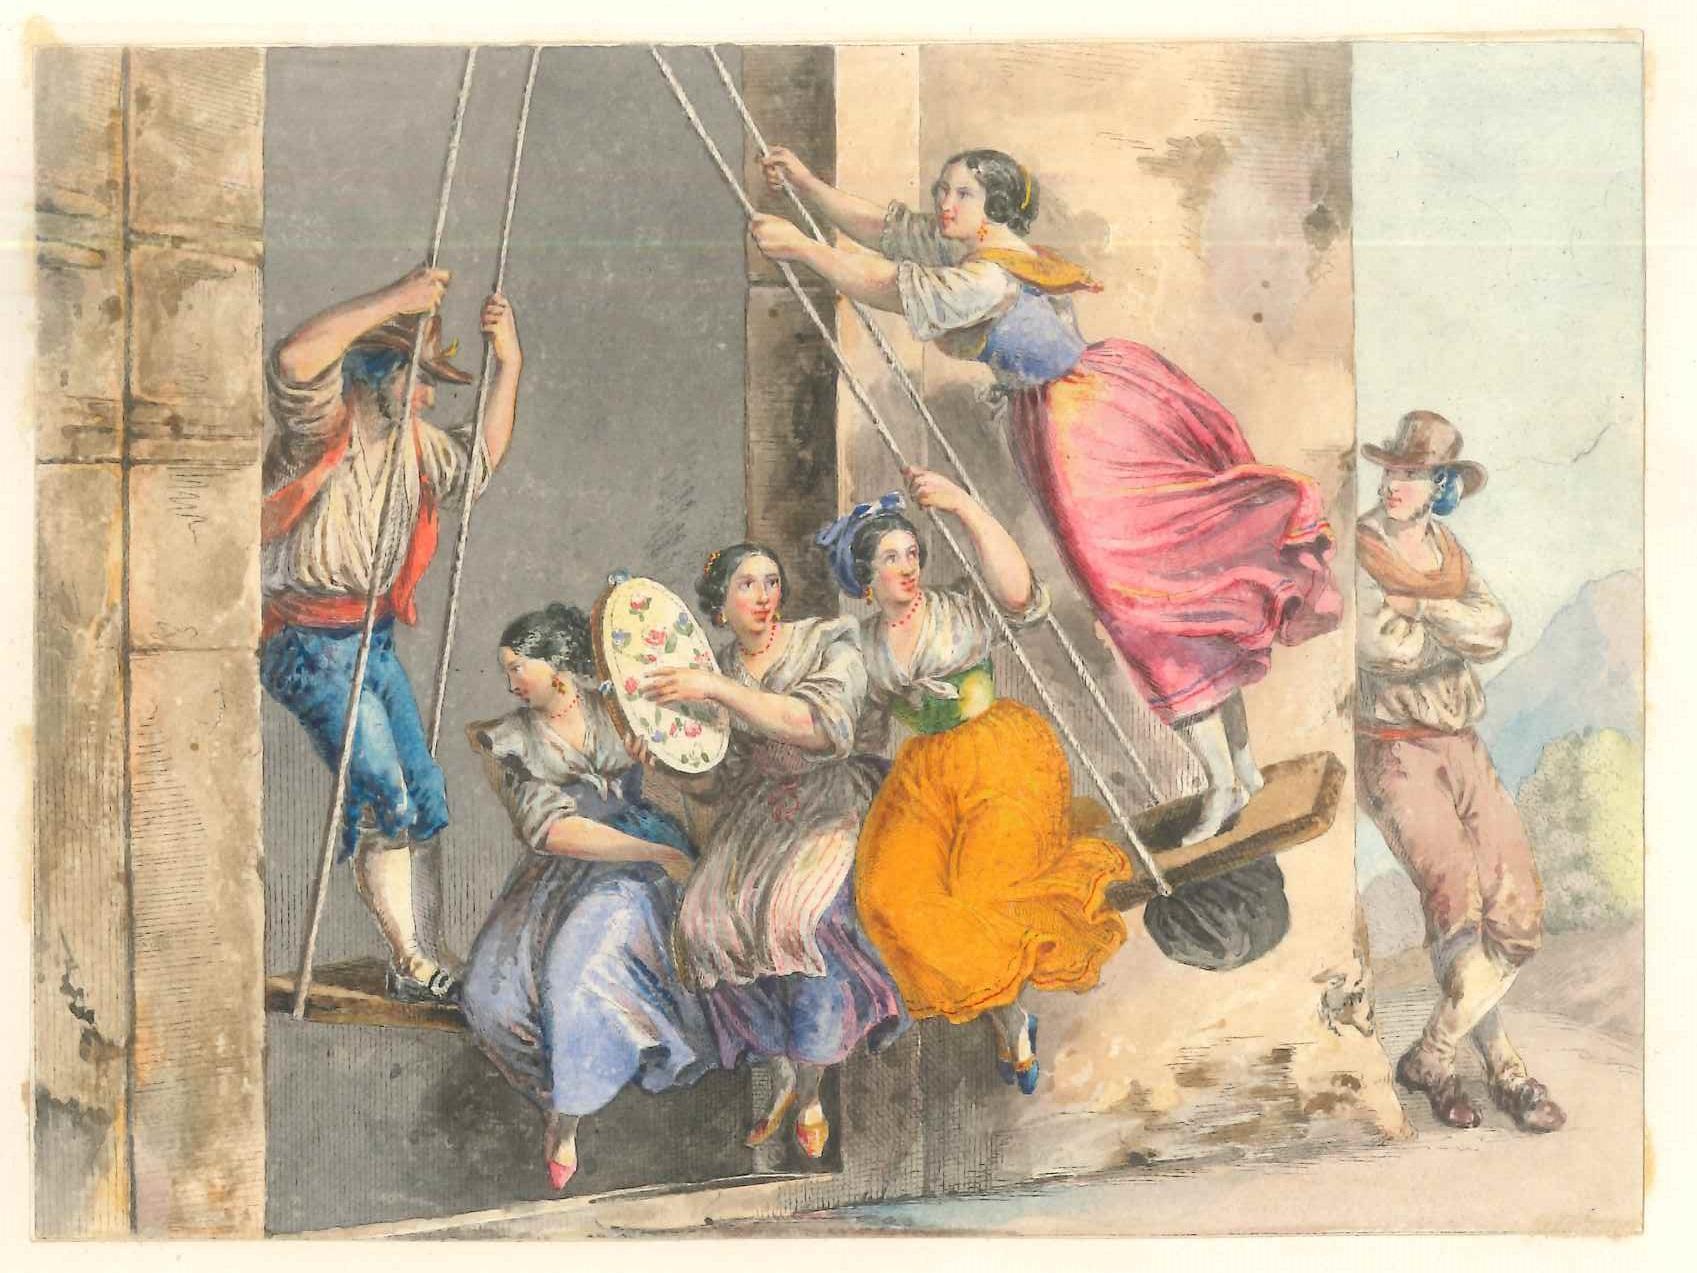 Unknown Figurative Print - Genre Scenes / Rome 1800 - Lithographs and Watercolors - Mid 19th Century